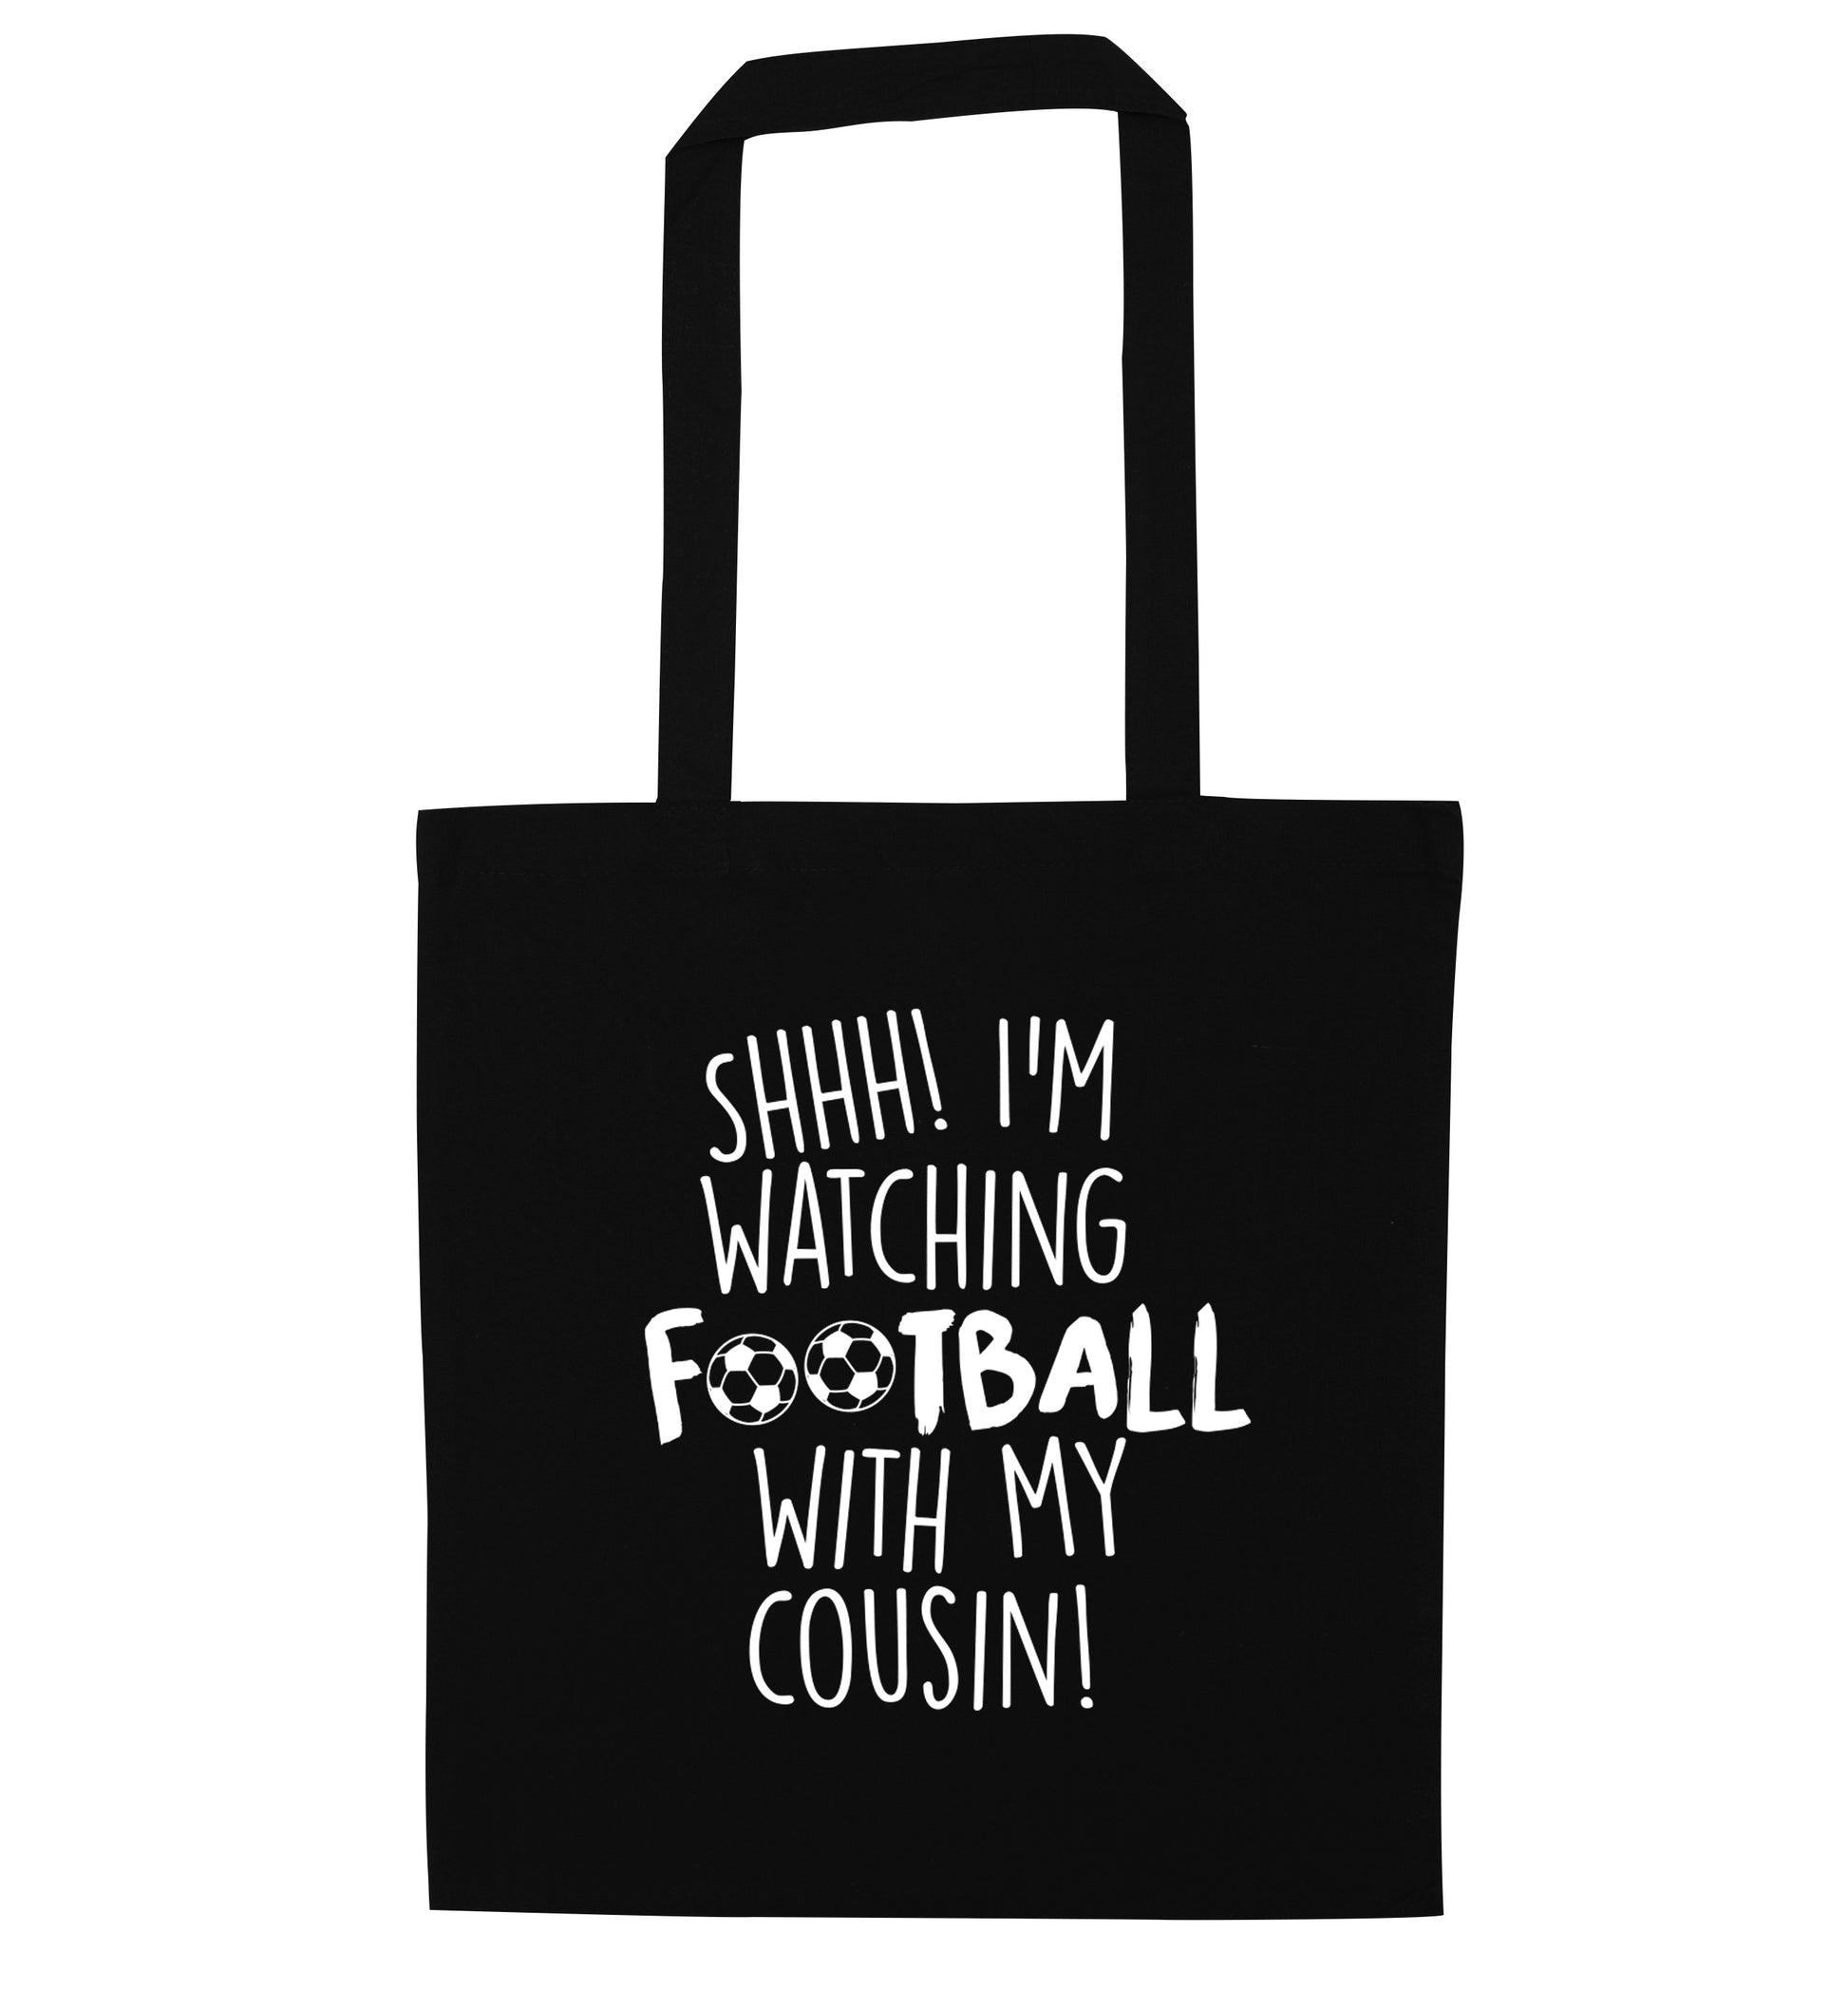 Shhh I'm watching football with my cousin black tote bag